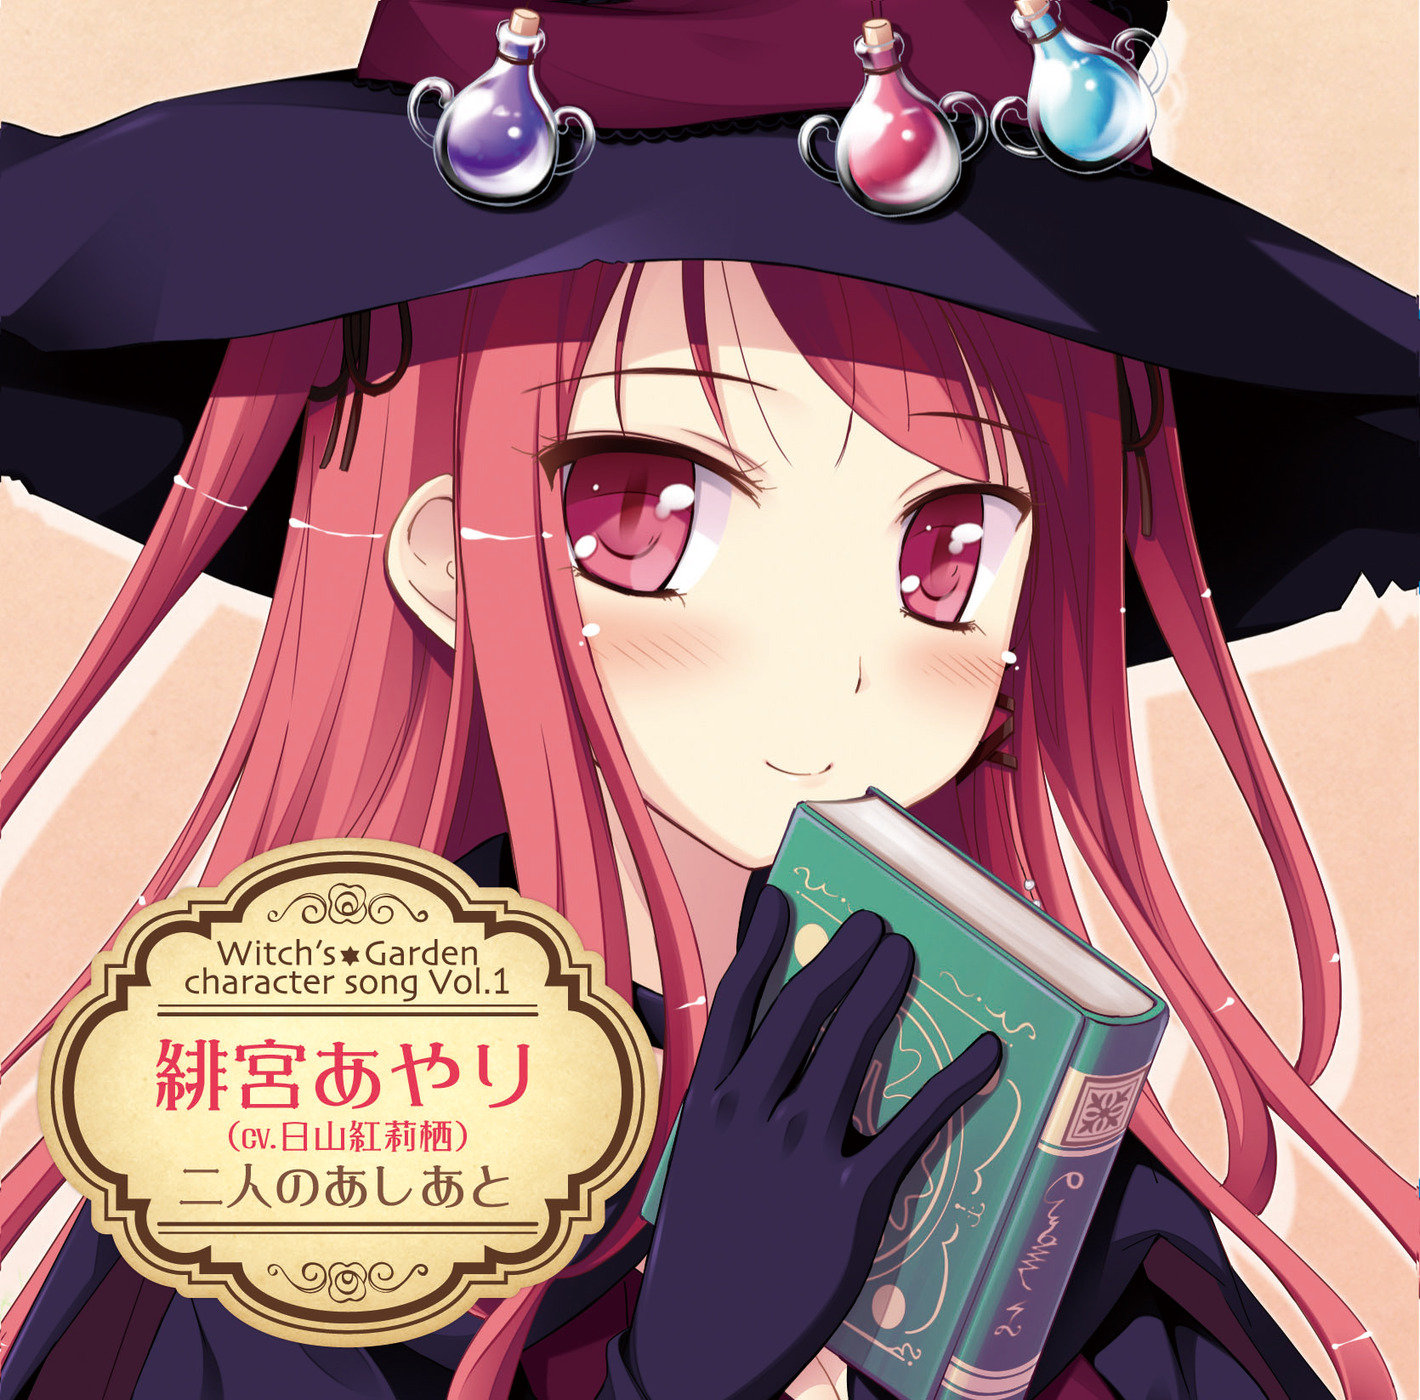 Character import. The Witch's Garden.